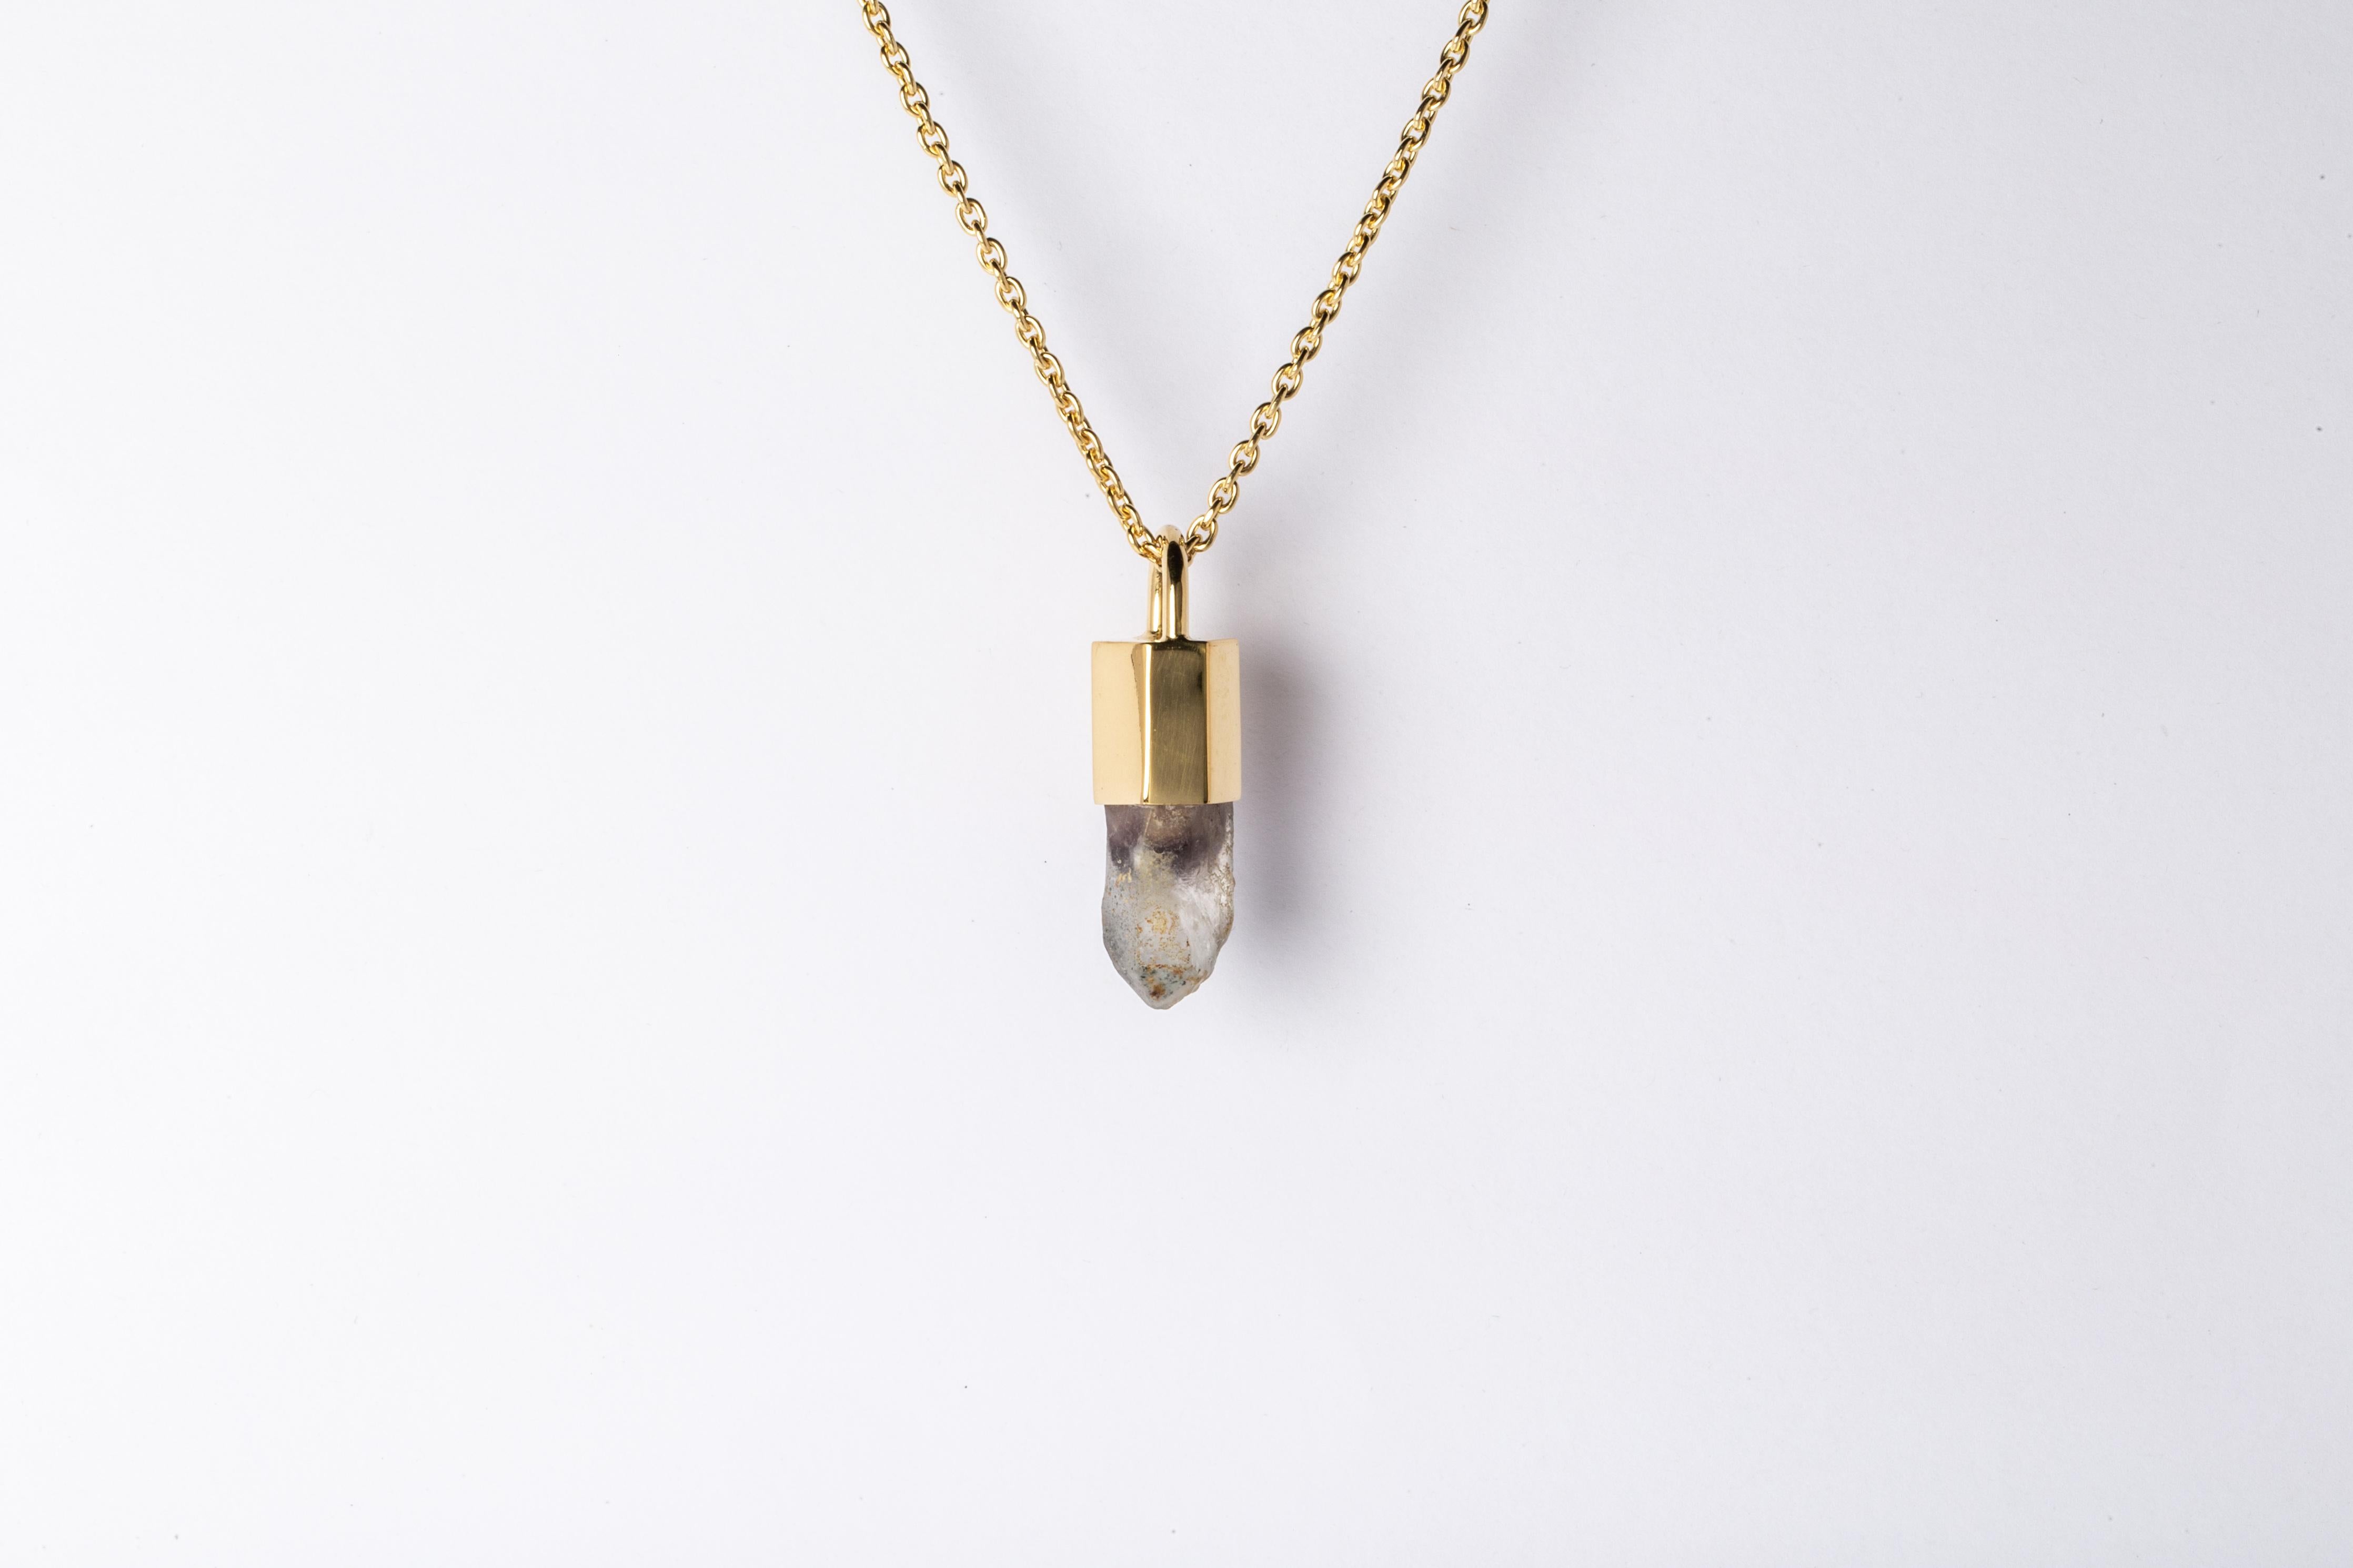 Pendant necklace in brass, sterling silver, and a rough of hematite quartz. Brass and sterling silver are substrate, polished and electroplated with 18k gold and then dipped into acid to create the subtly destroyed surface.
The Talisman series is an